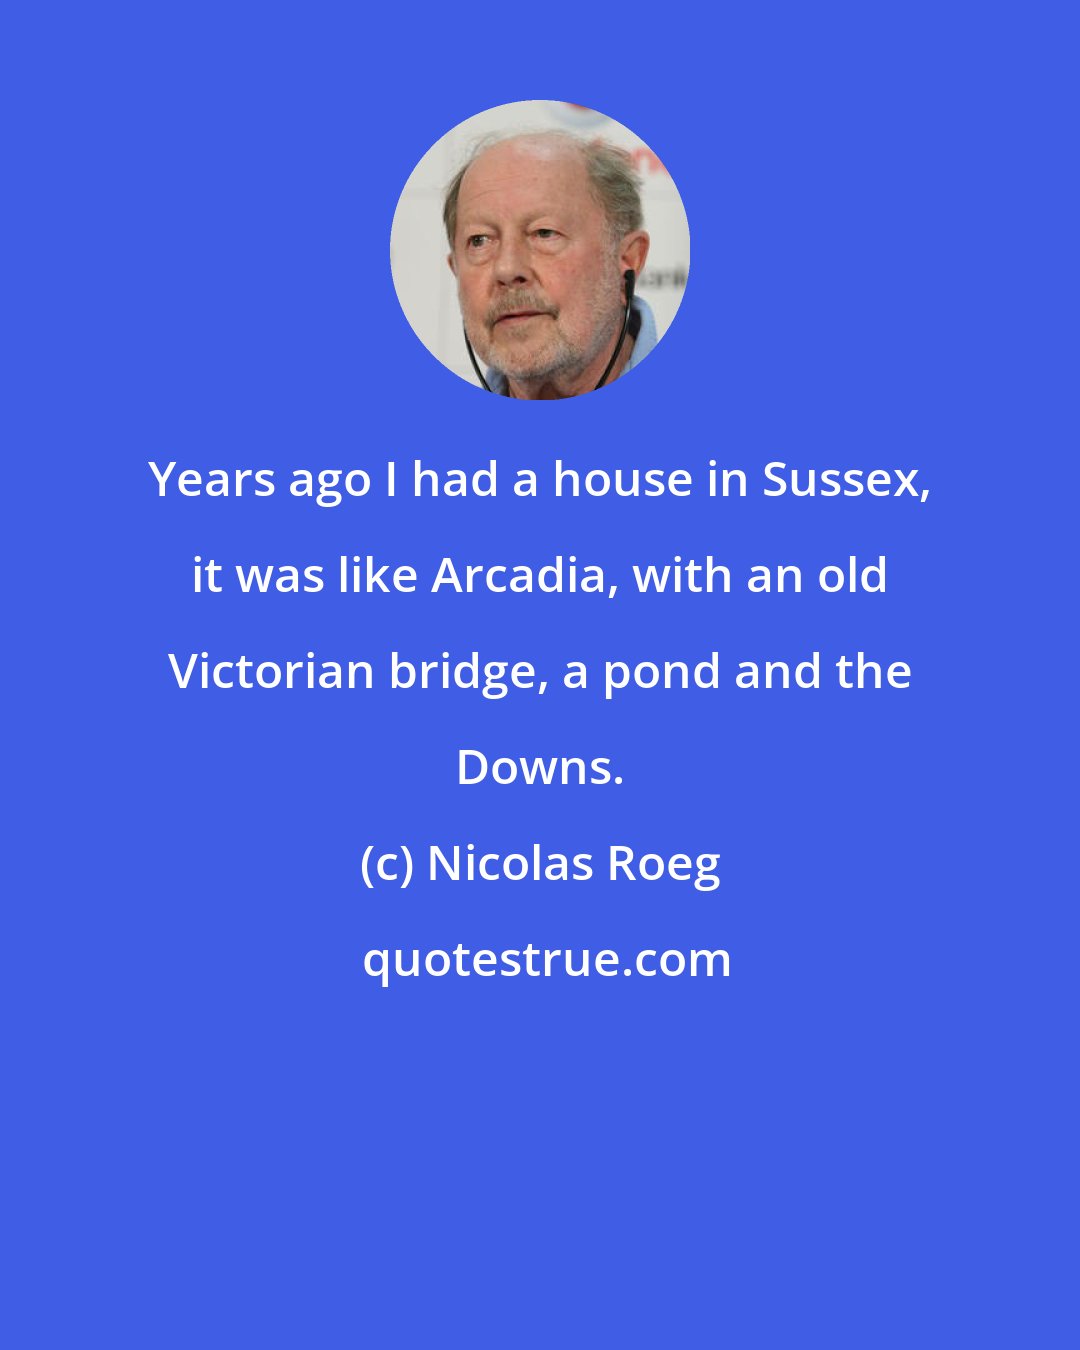 Nicolas Roeg: Years ago I had a house in Sussex, it was like Arcadia, with an old Victorian bridge, a pond and the Downs.